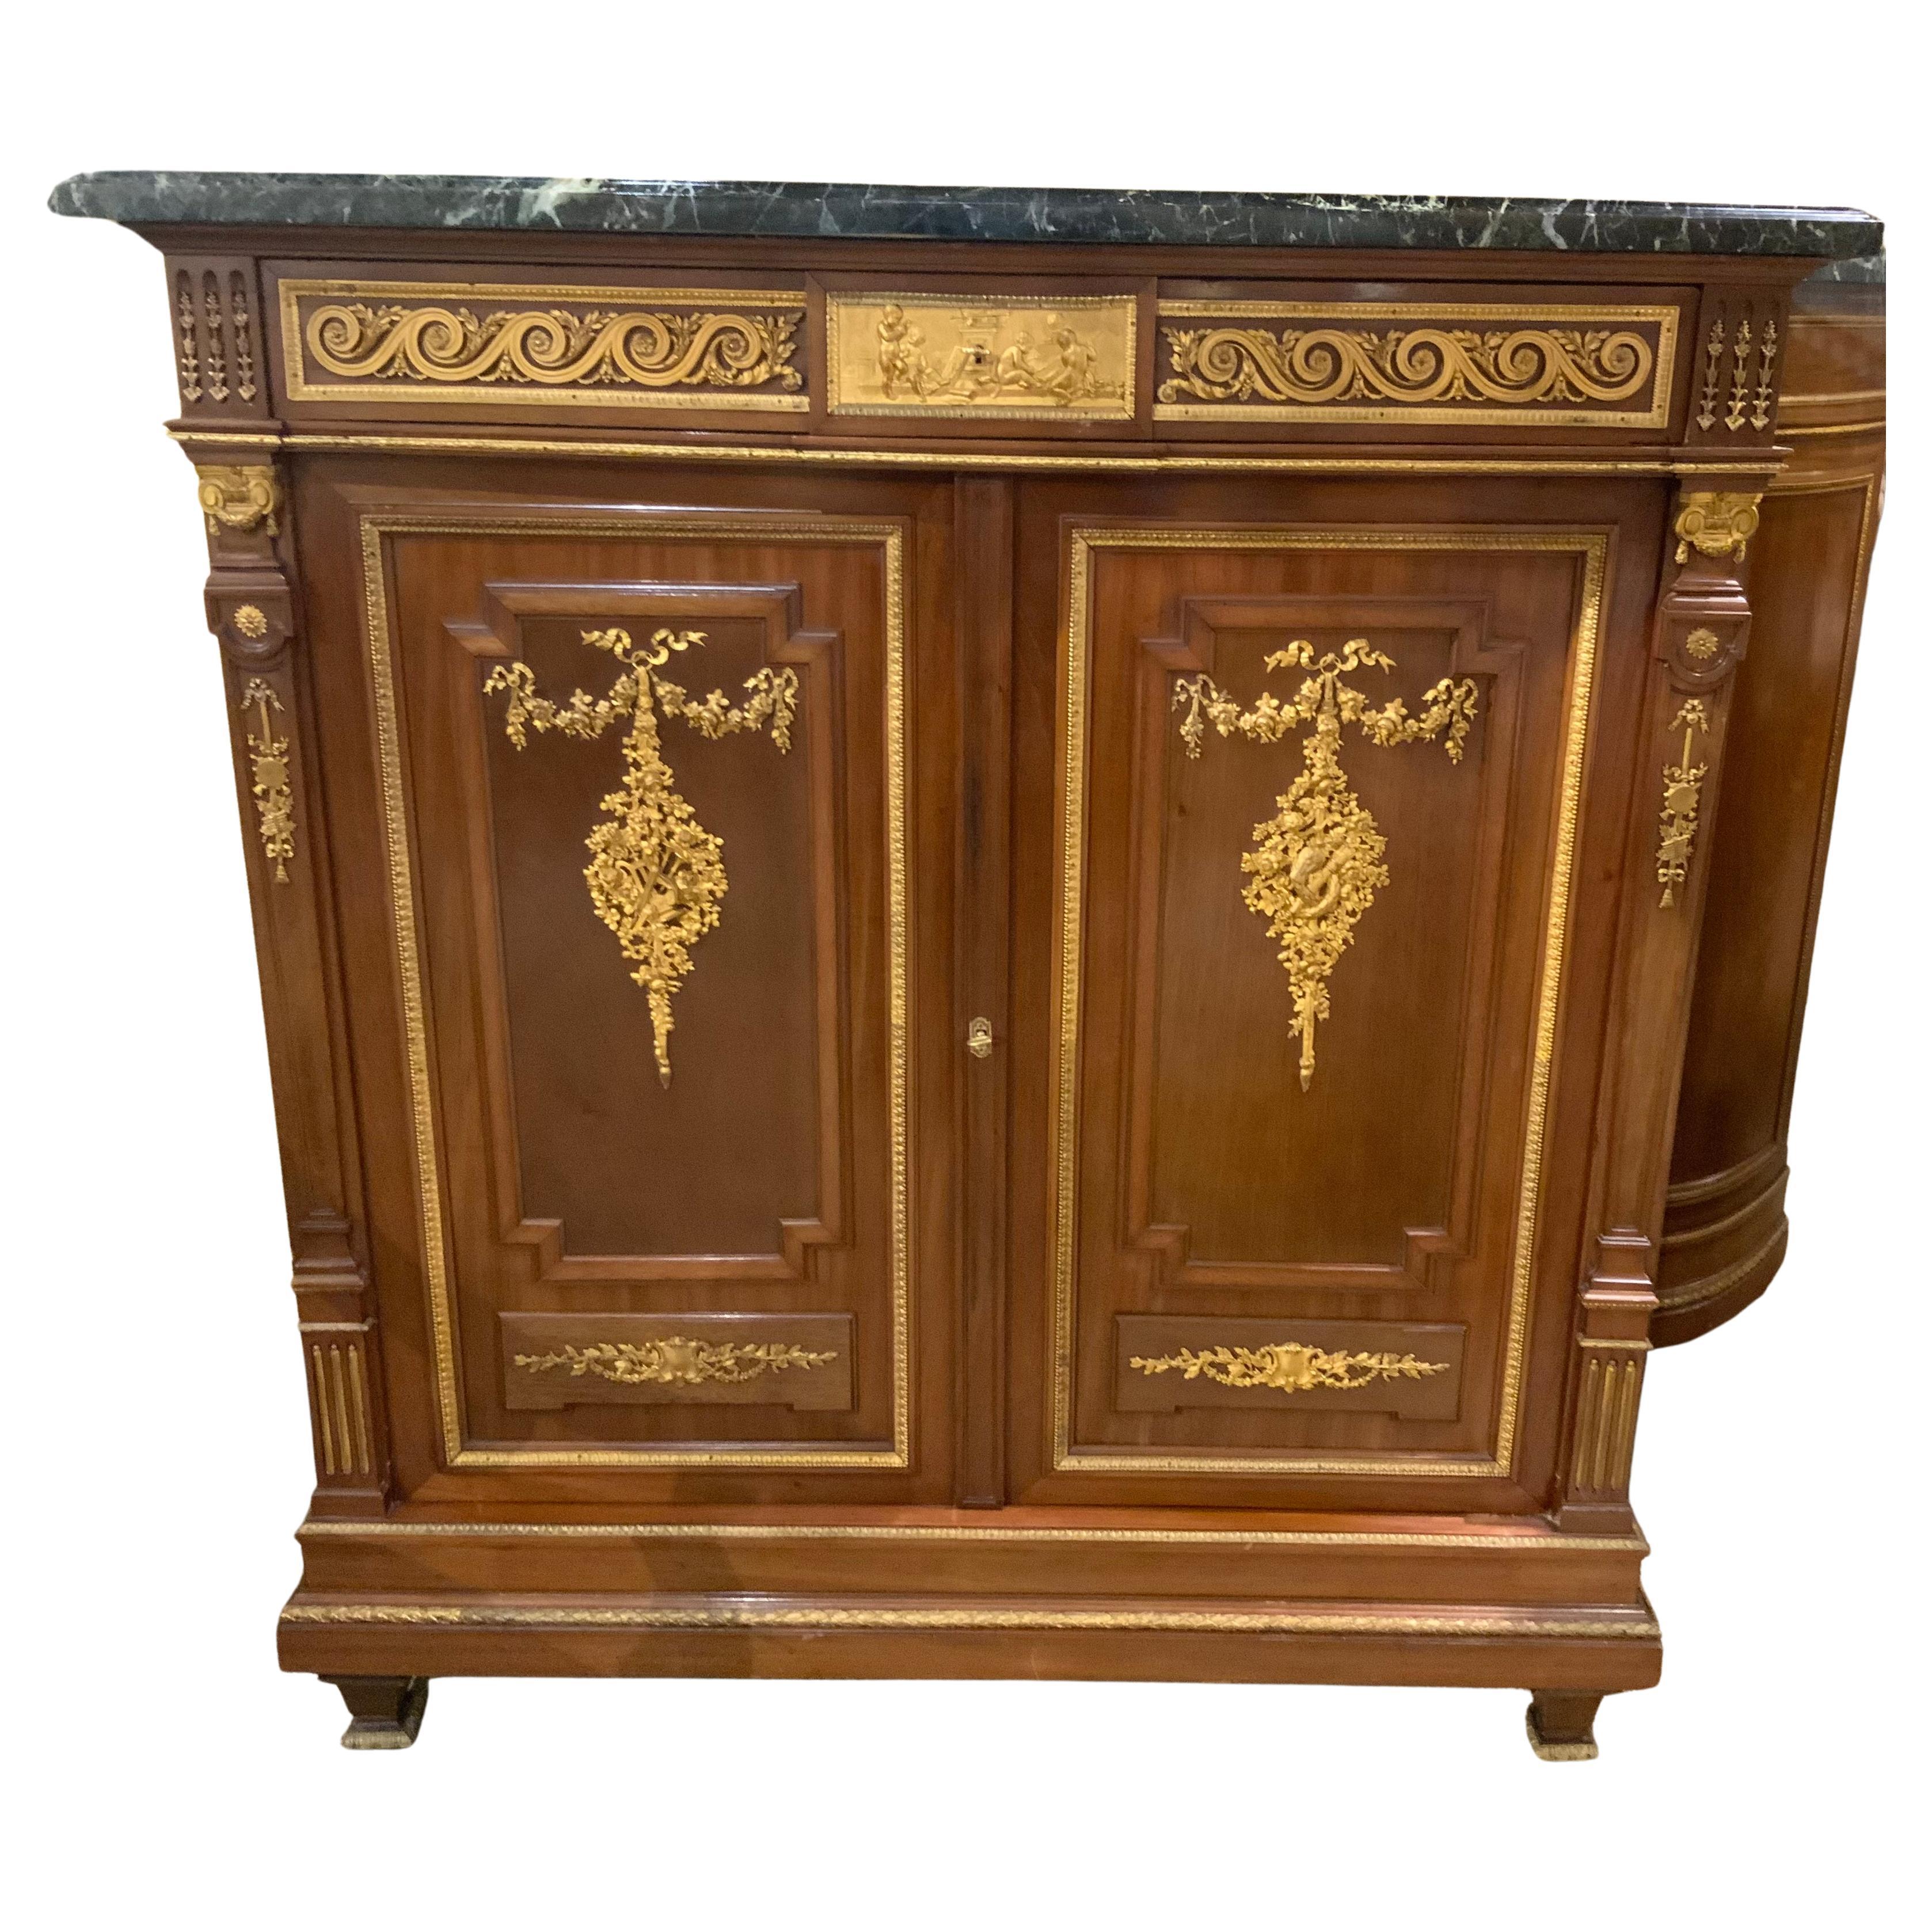 French Louis XVI-Style Mahogany Cabinet with Fine Bronze Dore Mounts